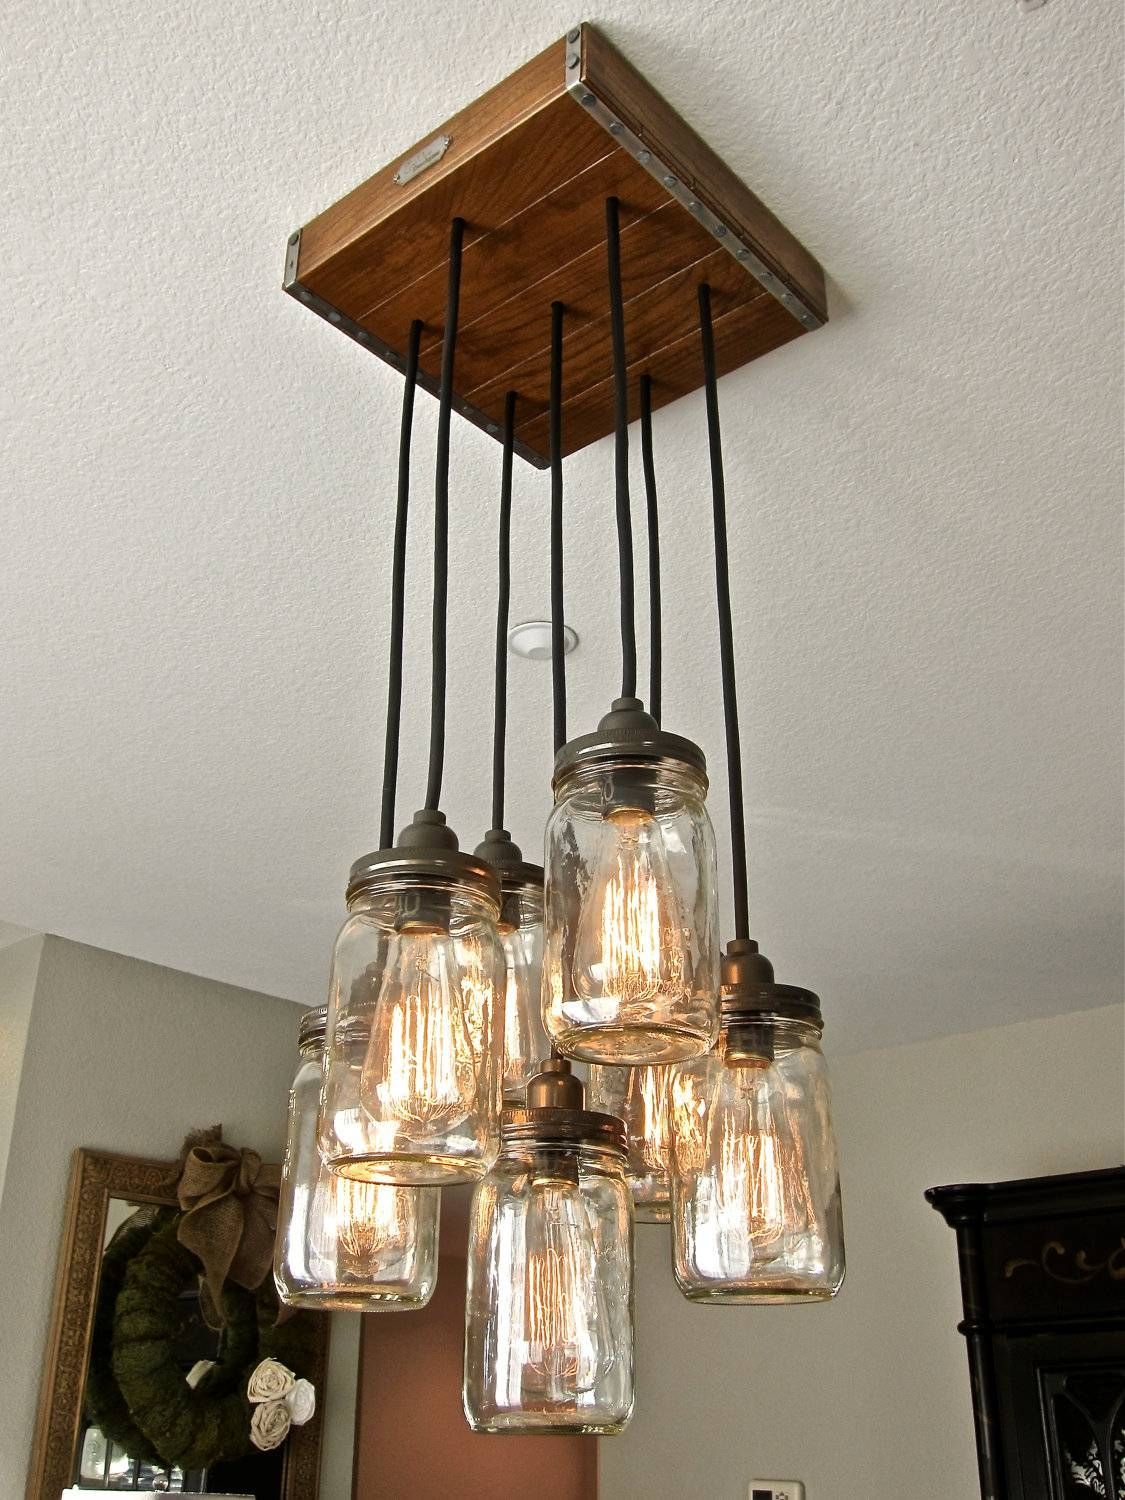 Good Rustic Pendant Lighting 49 About Remodel Large Clear Glass Intended For Rustic Clear Glass Pendant Lights (View 3 of 15)